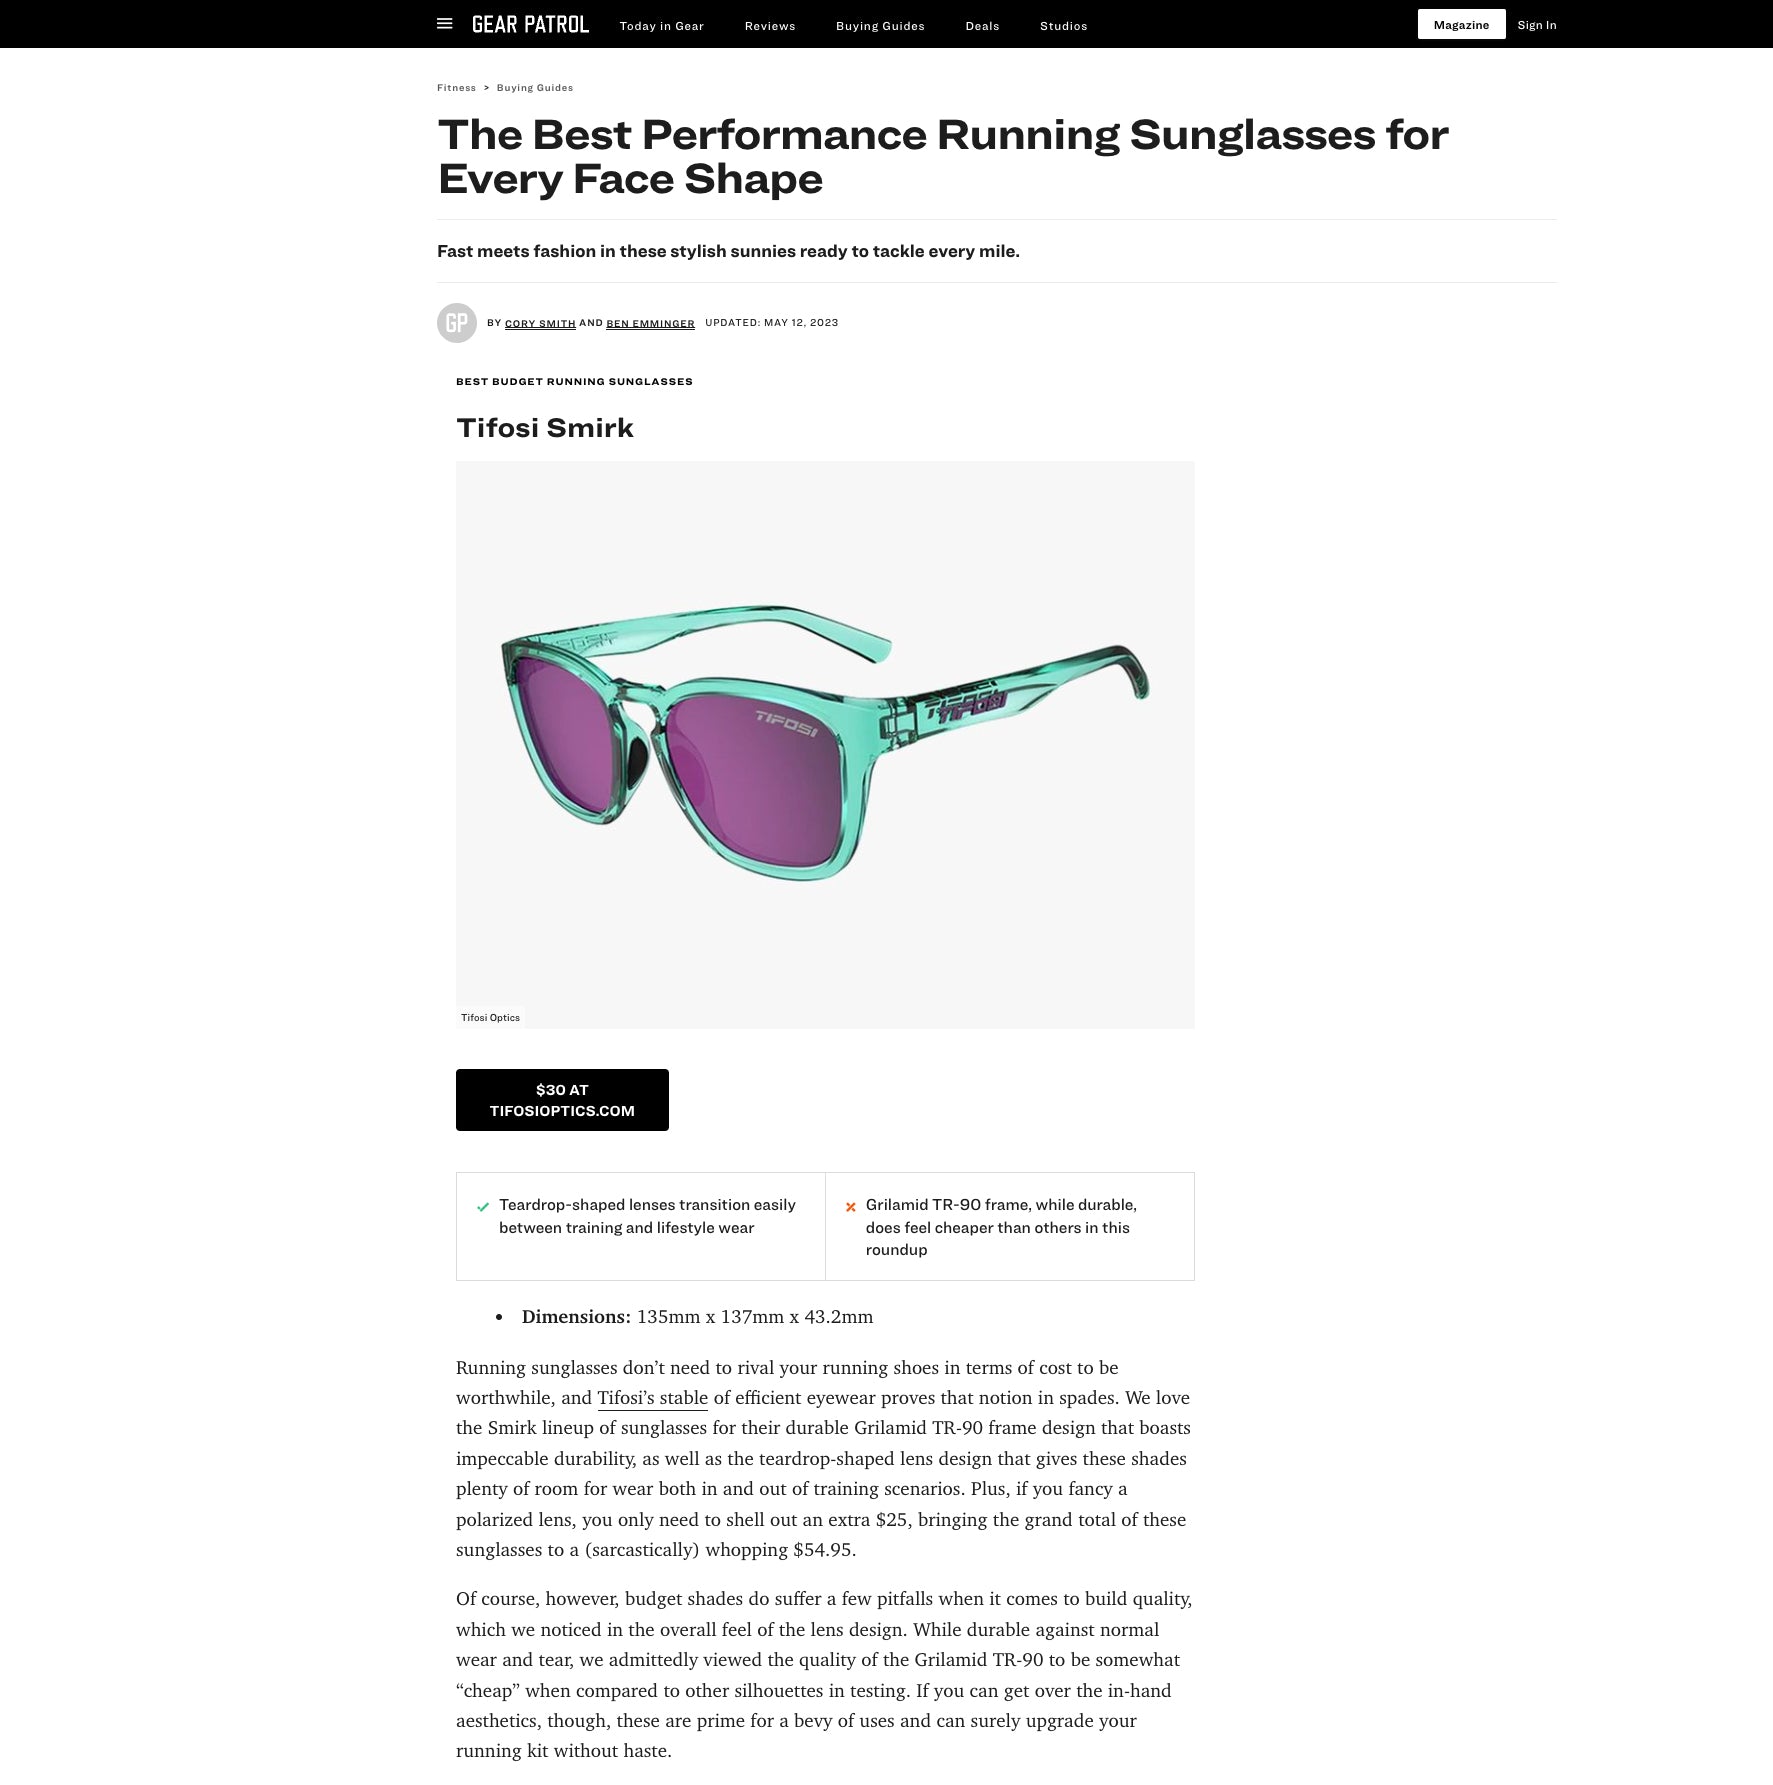 The Best Performance Running Sunglasses For Every Face Shape - Gear Patrol May 2023